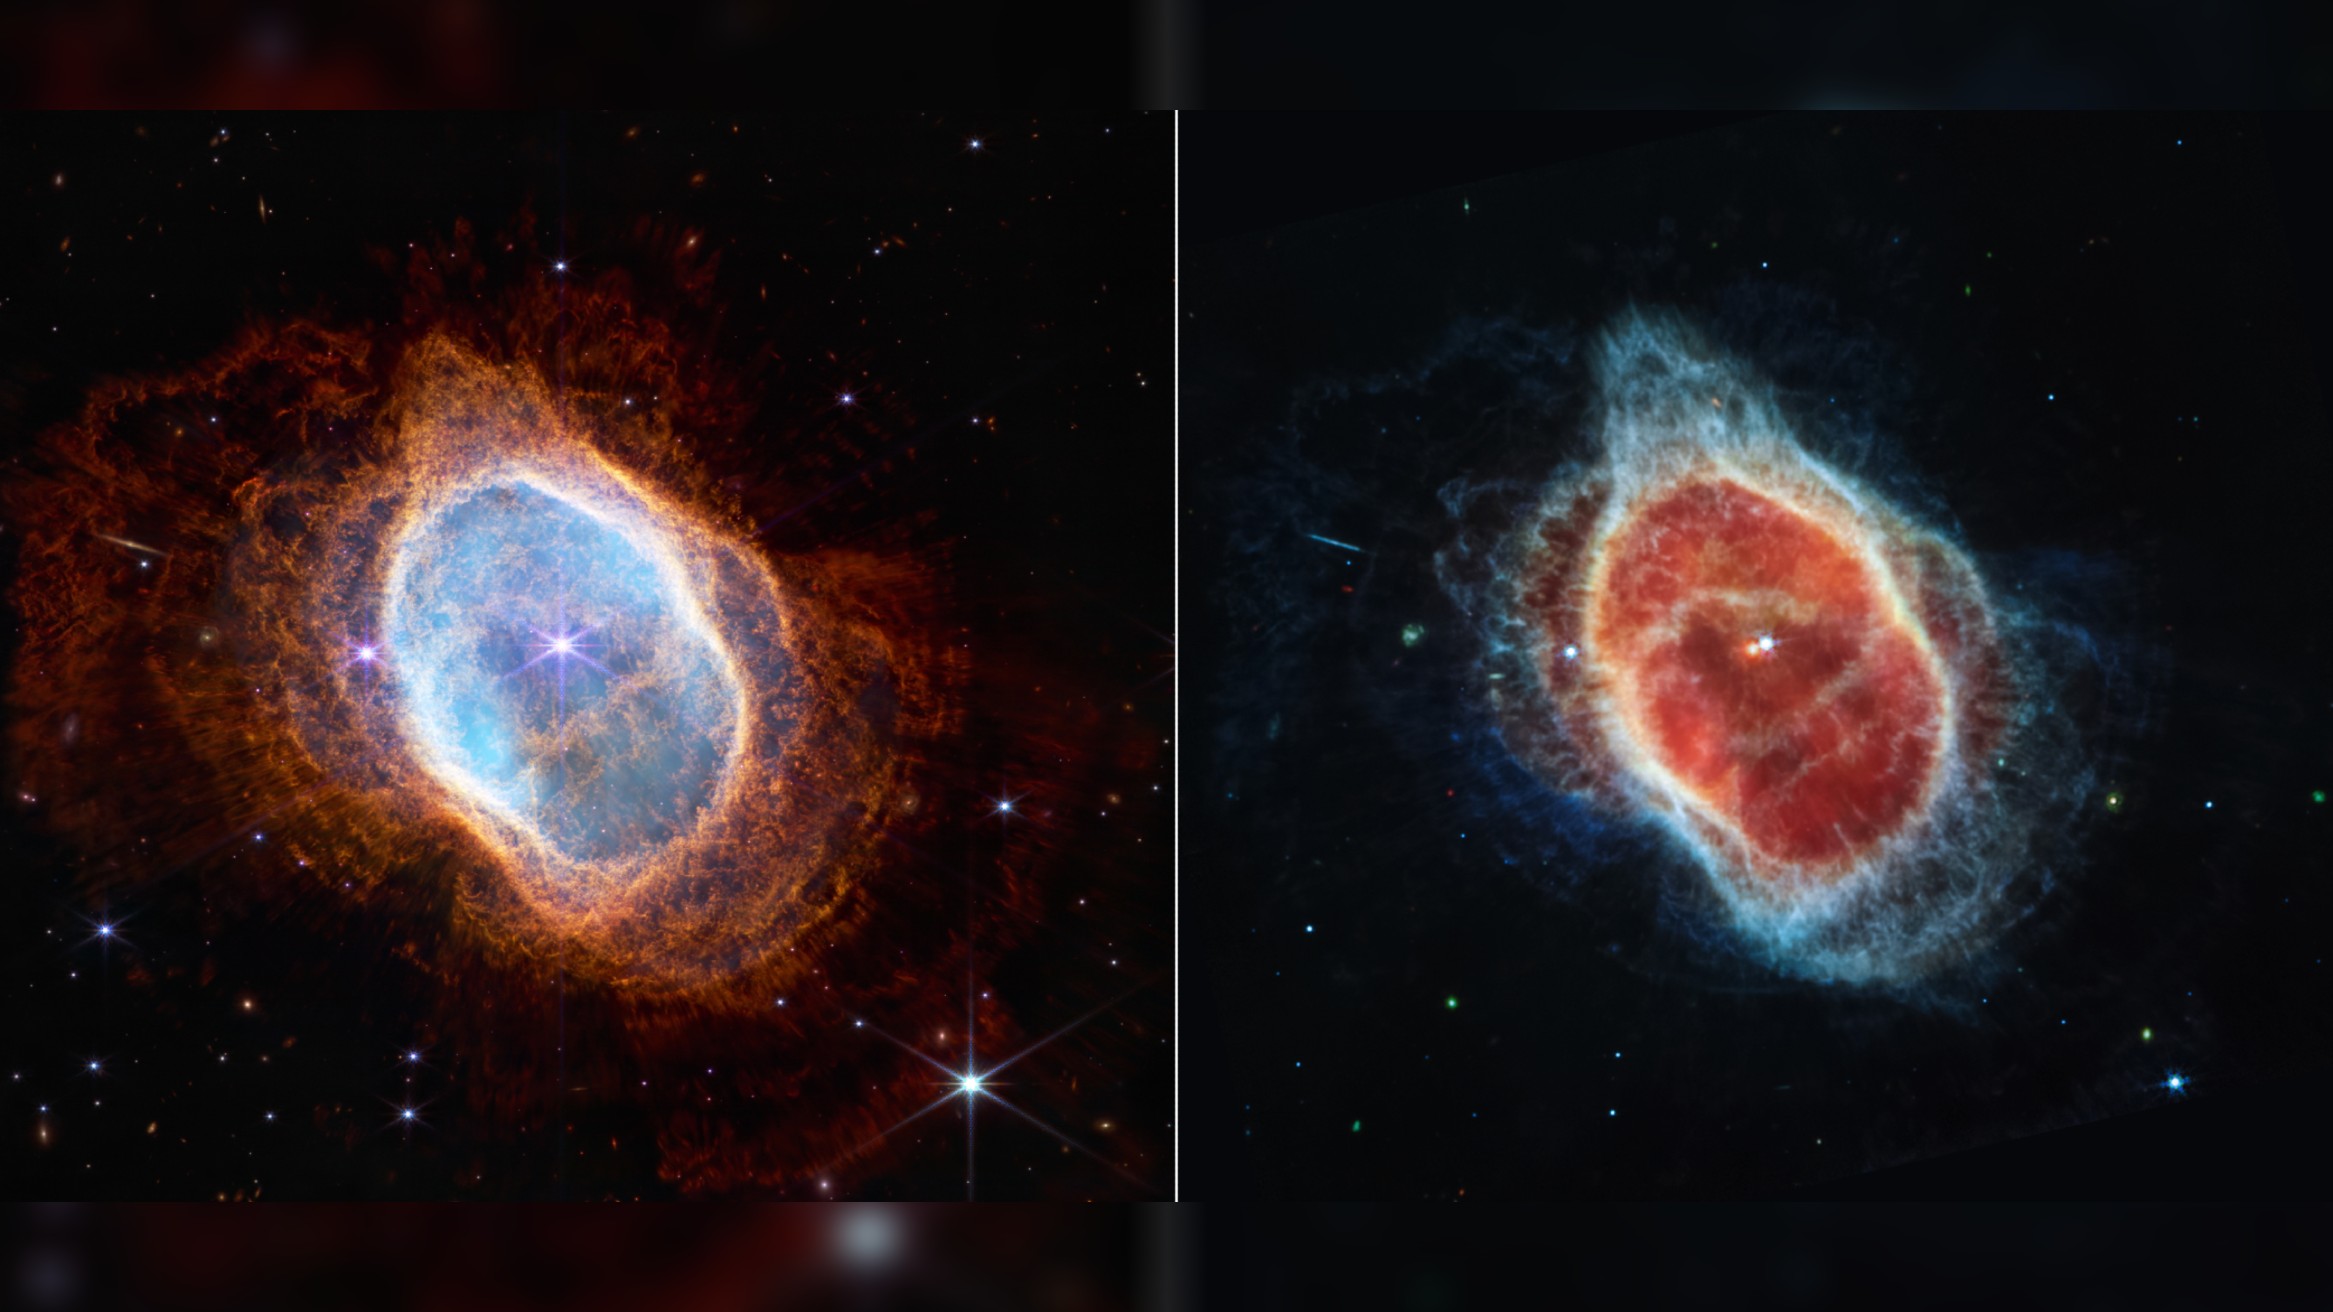 A side by side comparison of images of the Southern Ring Nebula taken in near-infrared (left) and mid-infrared (right). The left image shows wispy orange ribbons of gas and dust surrounding an oval shape 